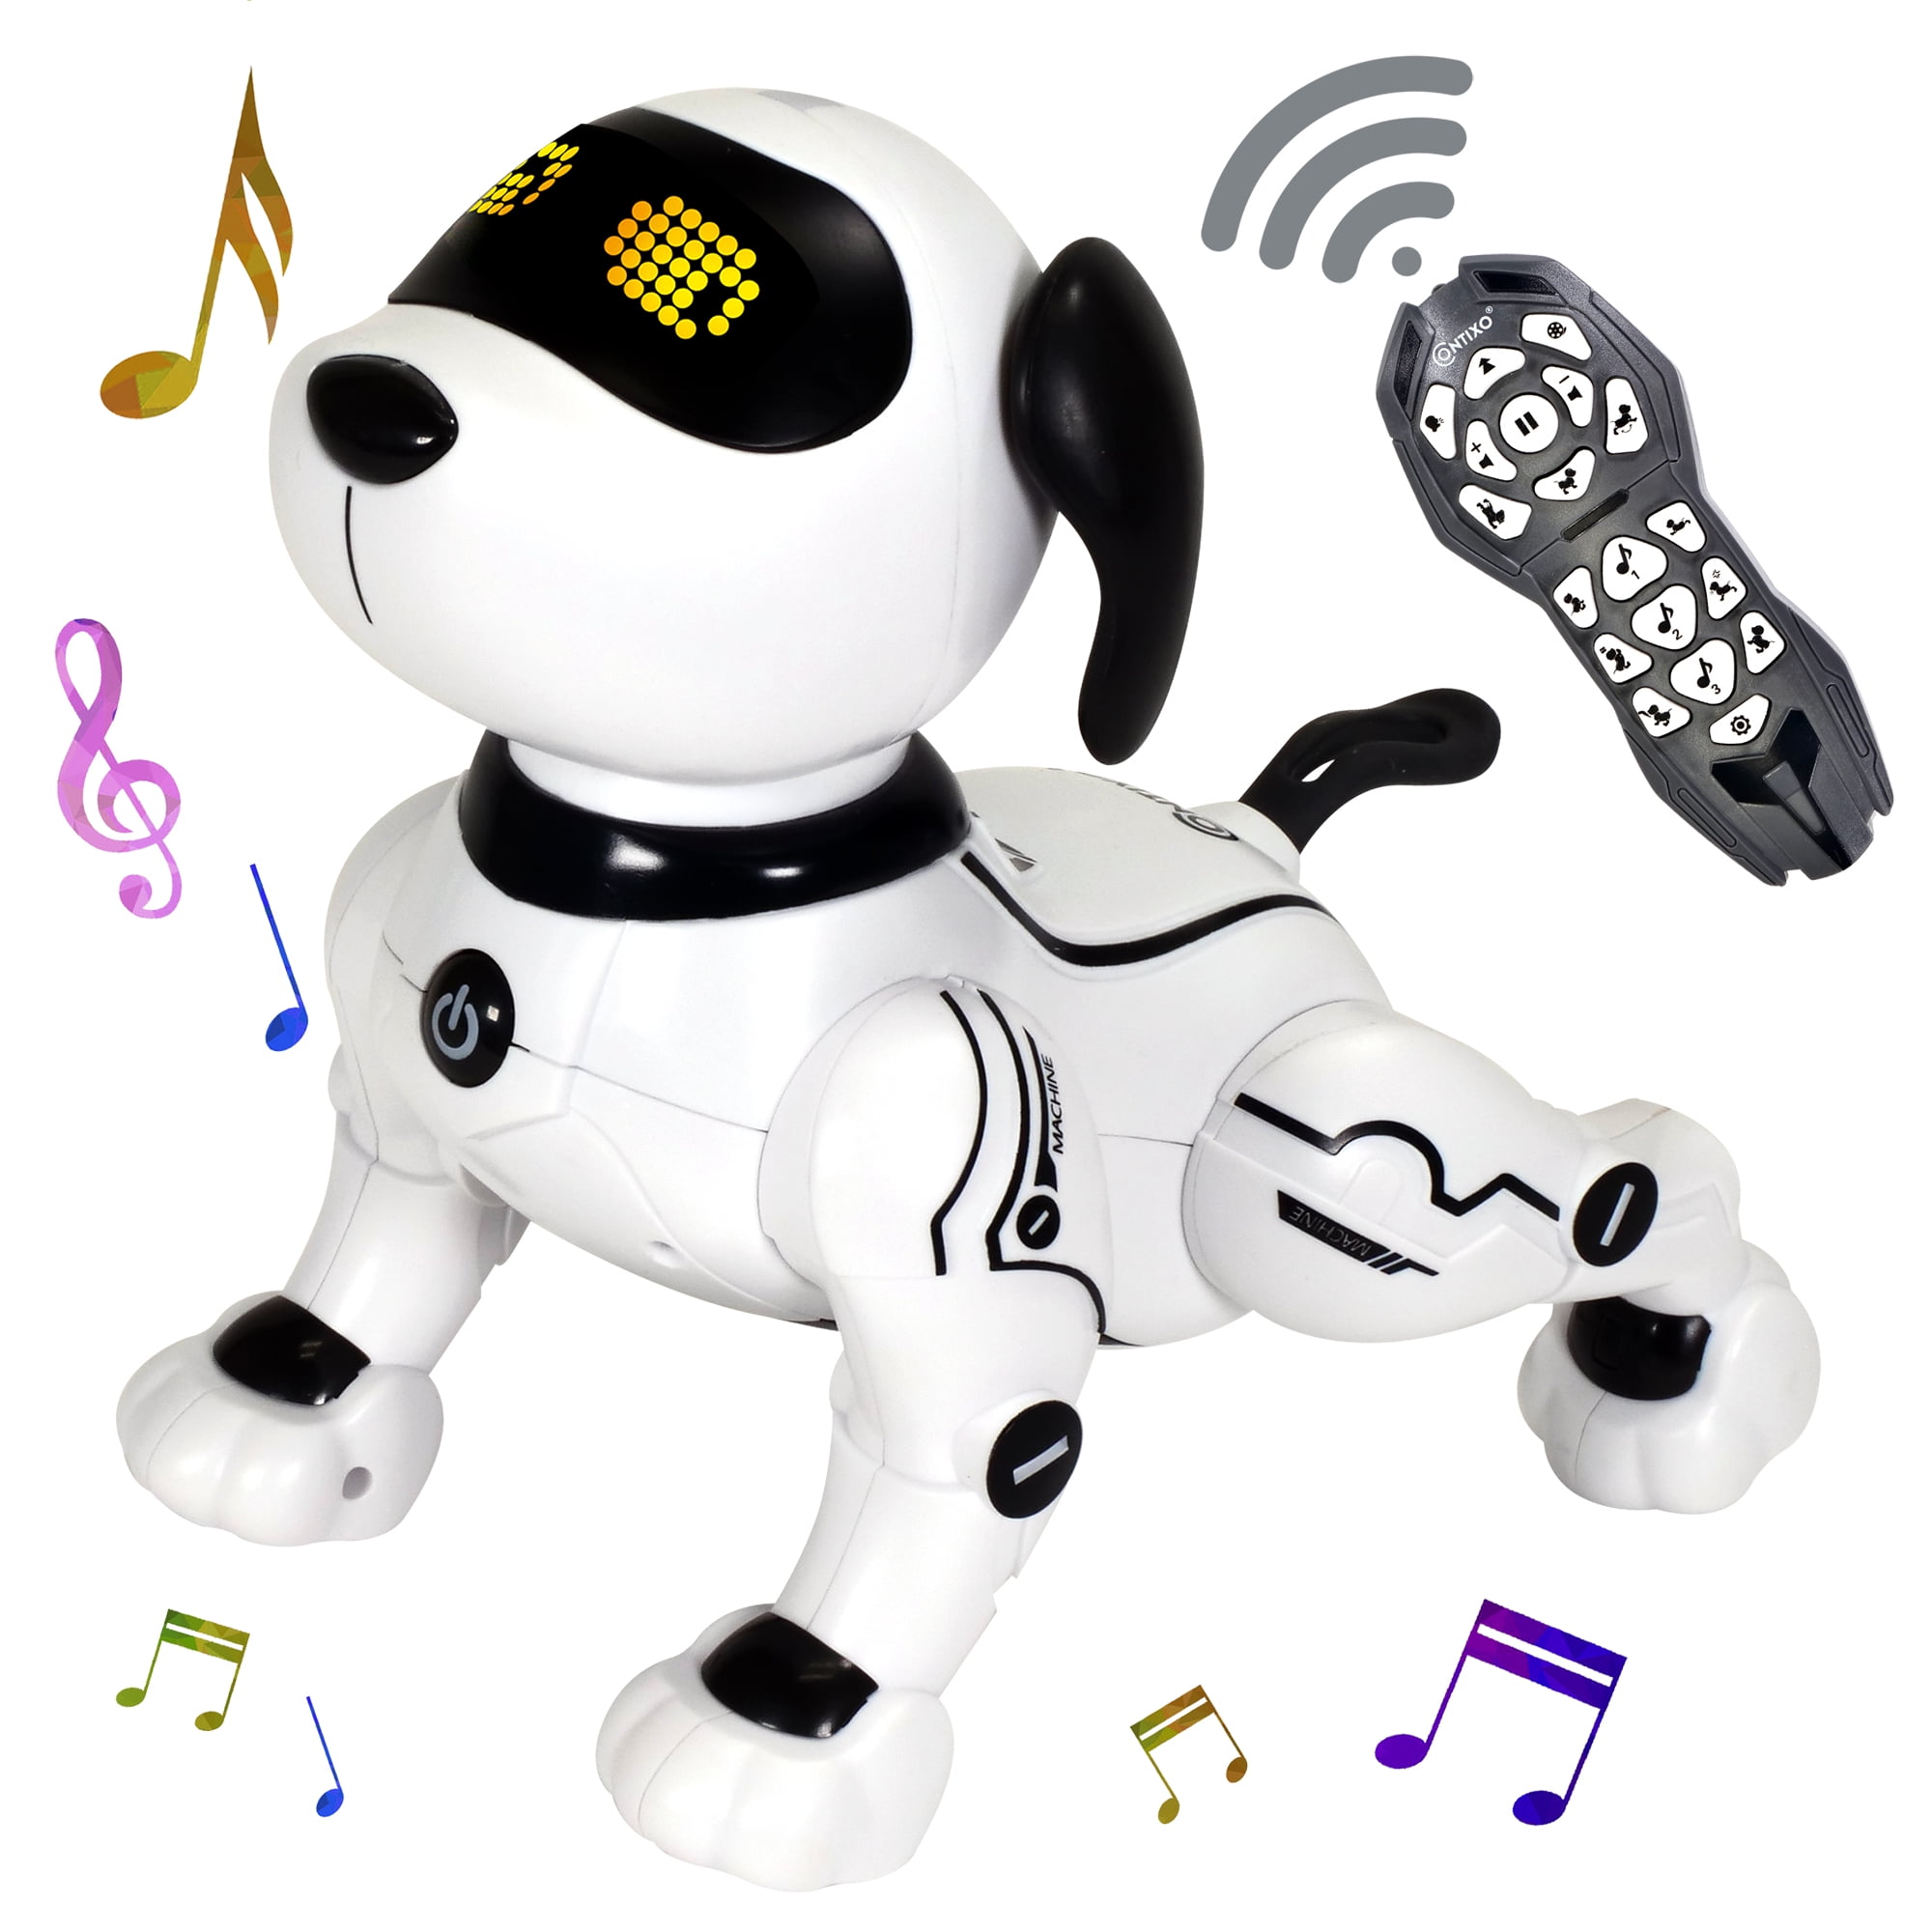 INTERACTIVE REMOTE CONTROL PET ROBOT DOG PUPPY EDUCATIONAL TOY GIFT FOR KIDS 